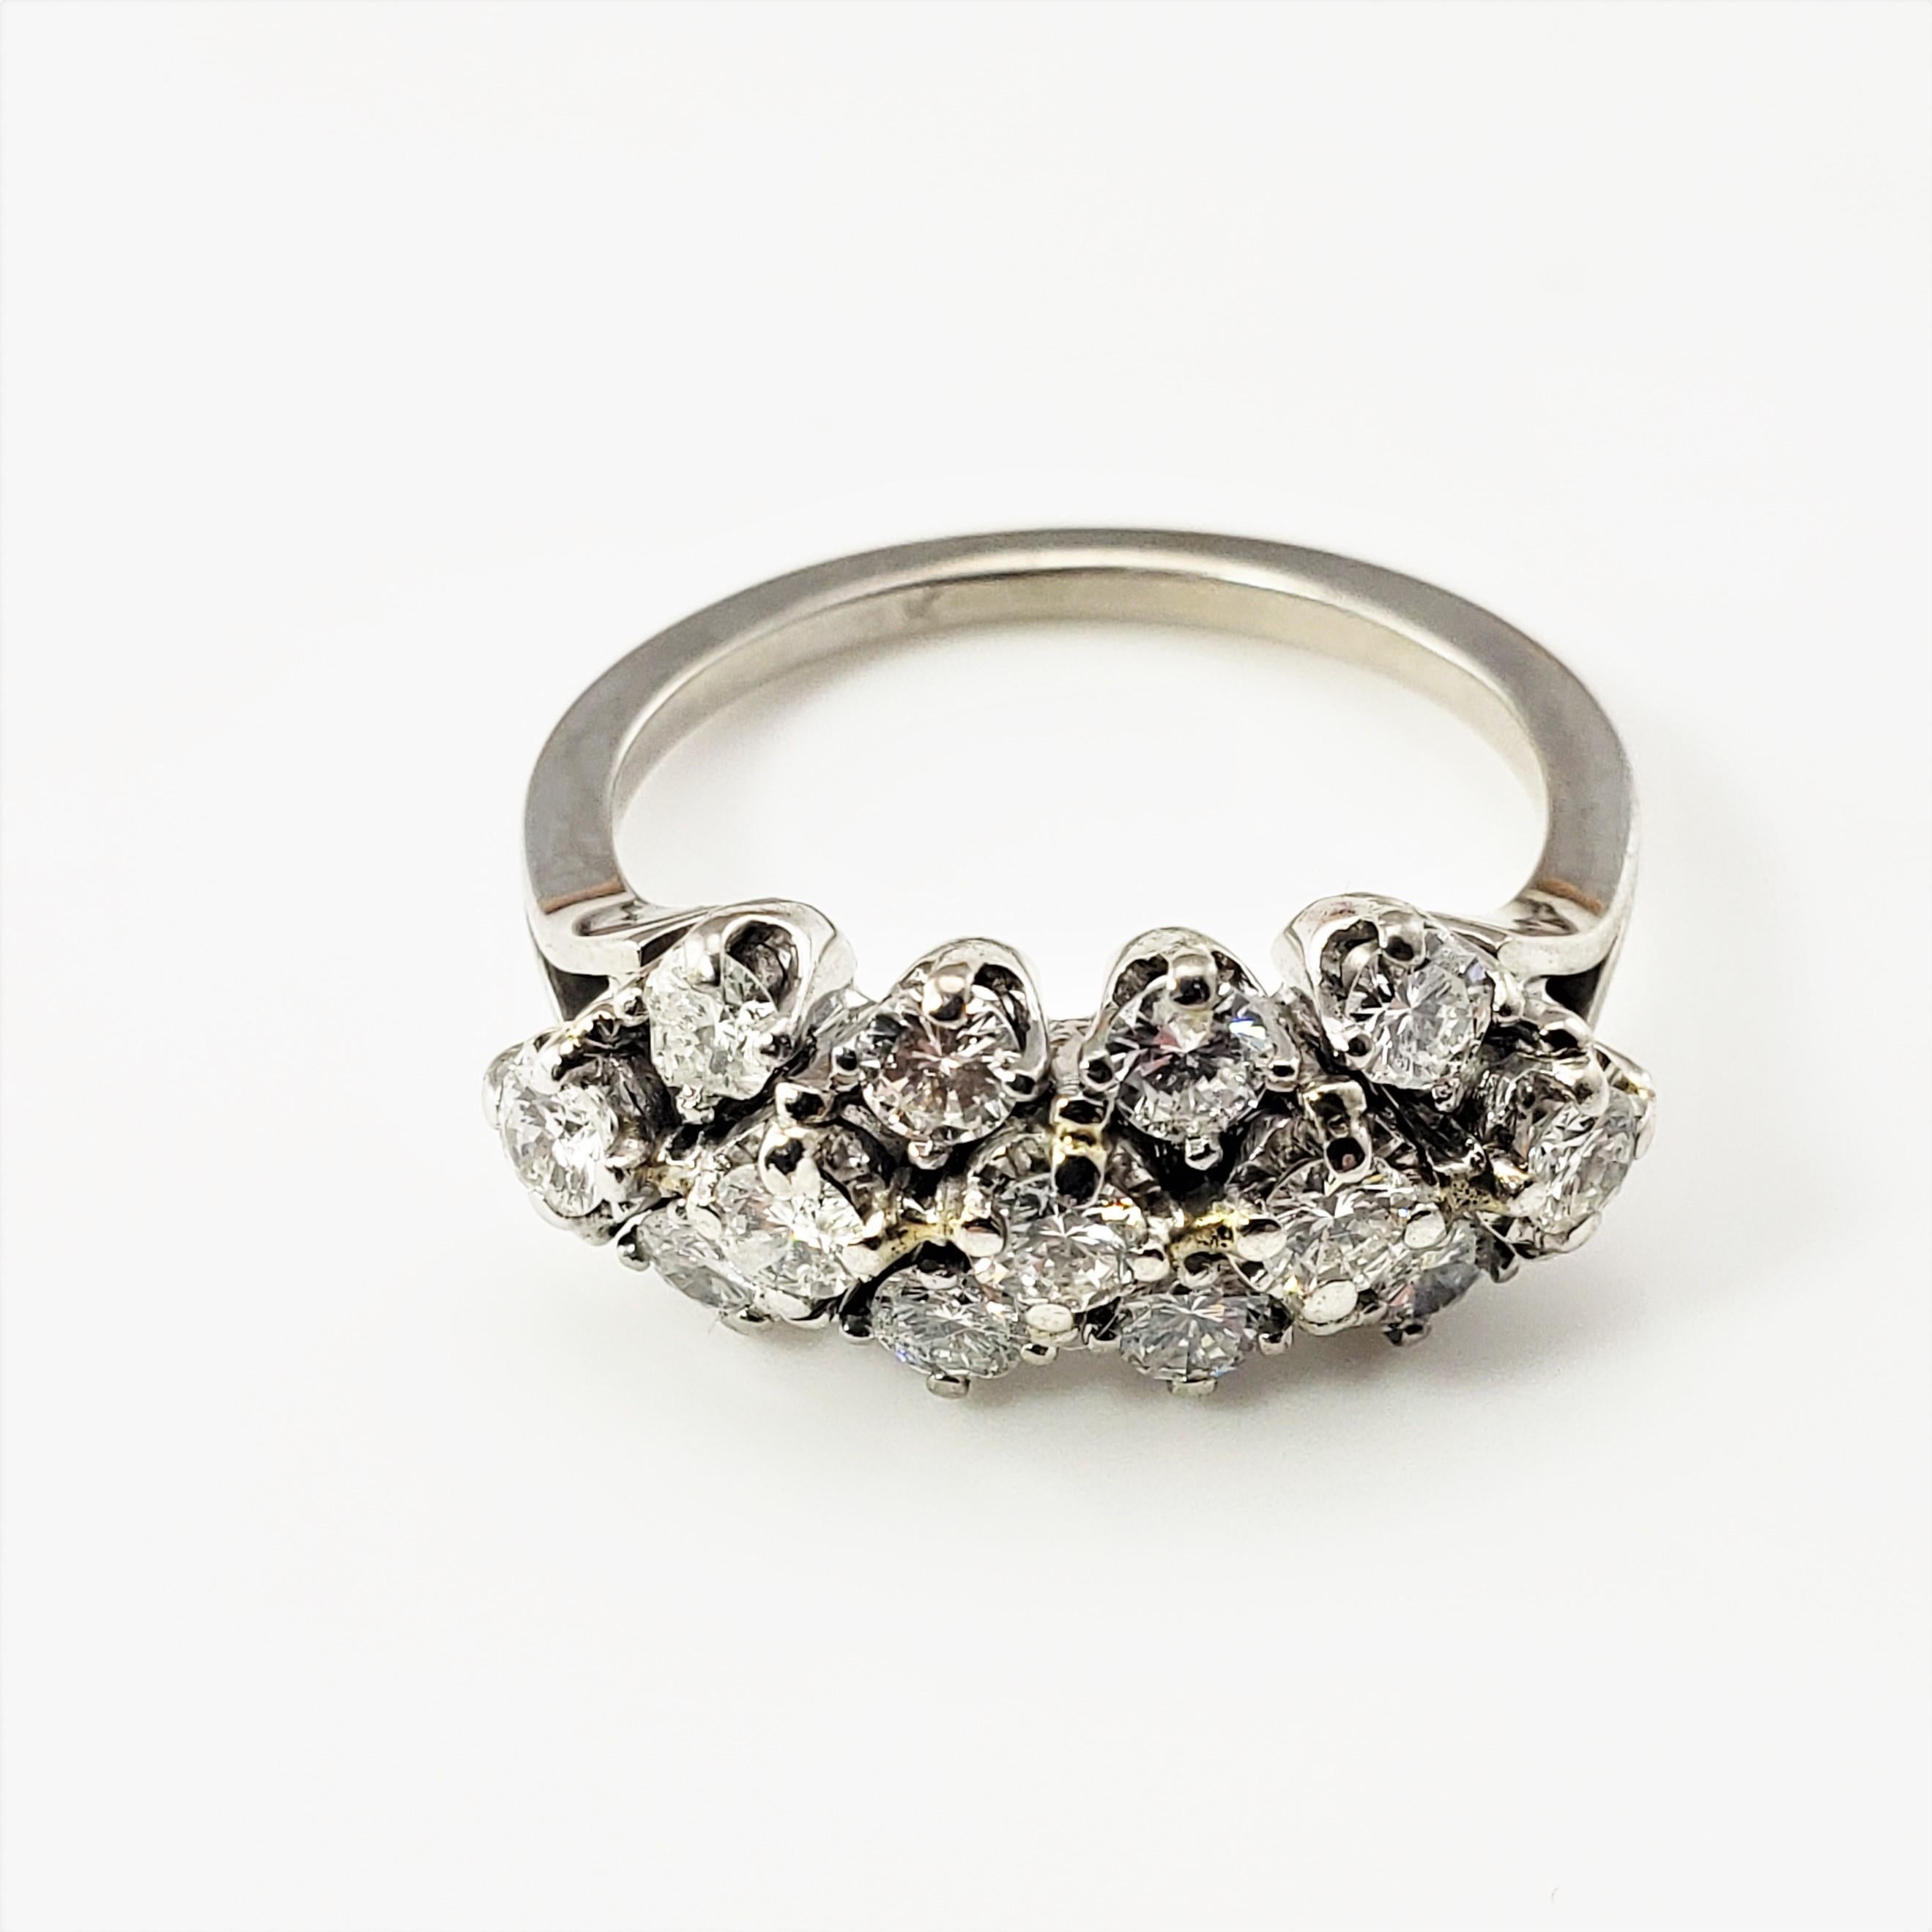 18 Karat White Gold and Diamond Ring Size 5.75-

This dazzling ring features 13 round brilliant cut diamonds* set in elegant 18K white gold.  Width:  7 mm.  Shank:  1.5 mm.
*Three stones have chips not visible to naked eye.

Approximate total